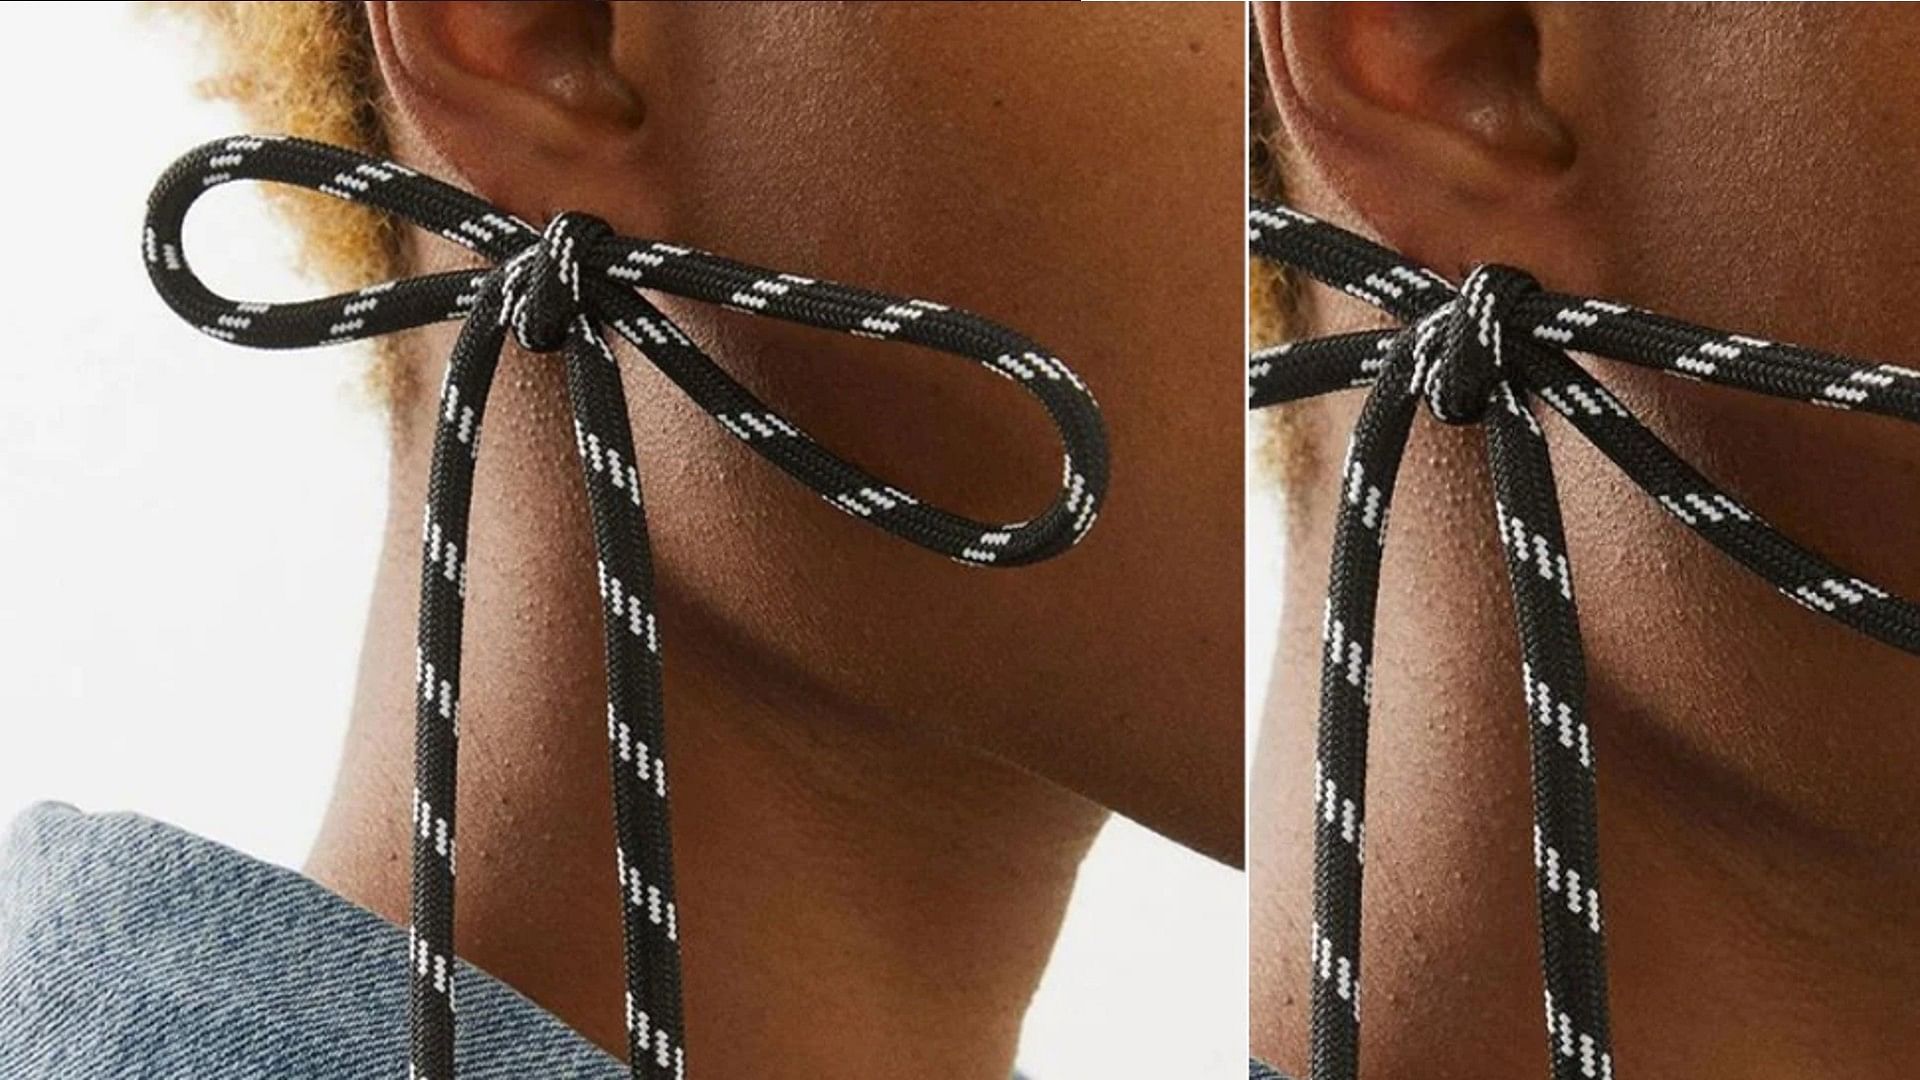 Balenciaga Shoelace Earrings know the price of this earrings that look like shoelaces